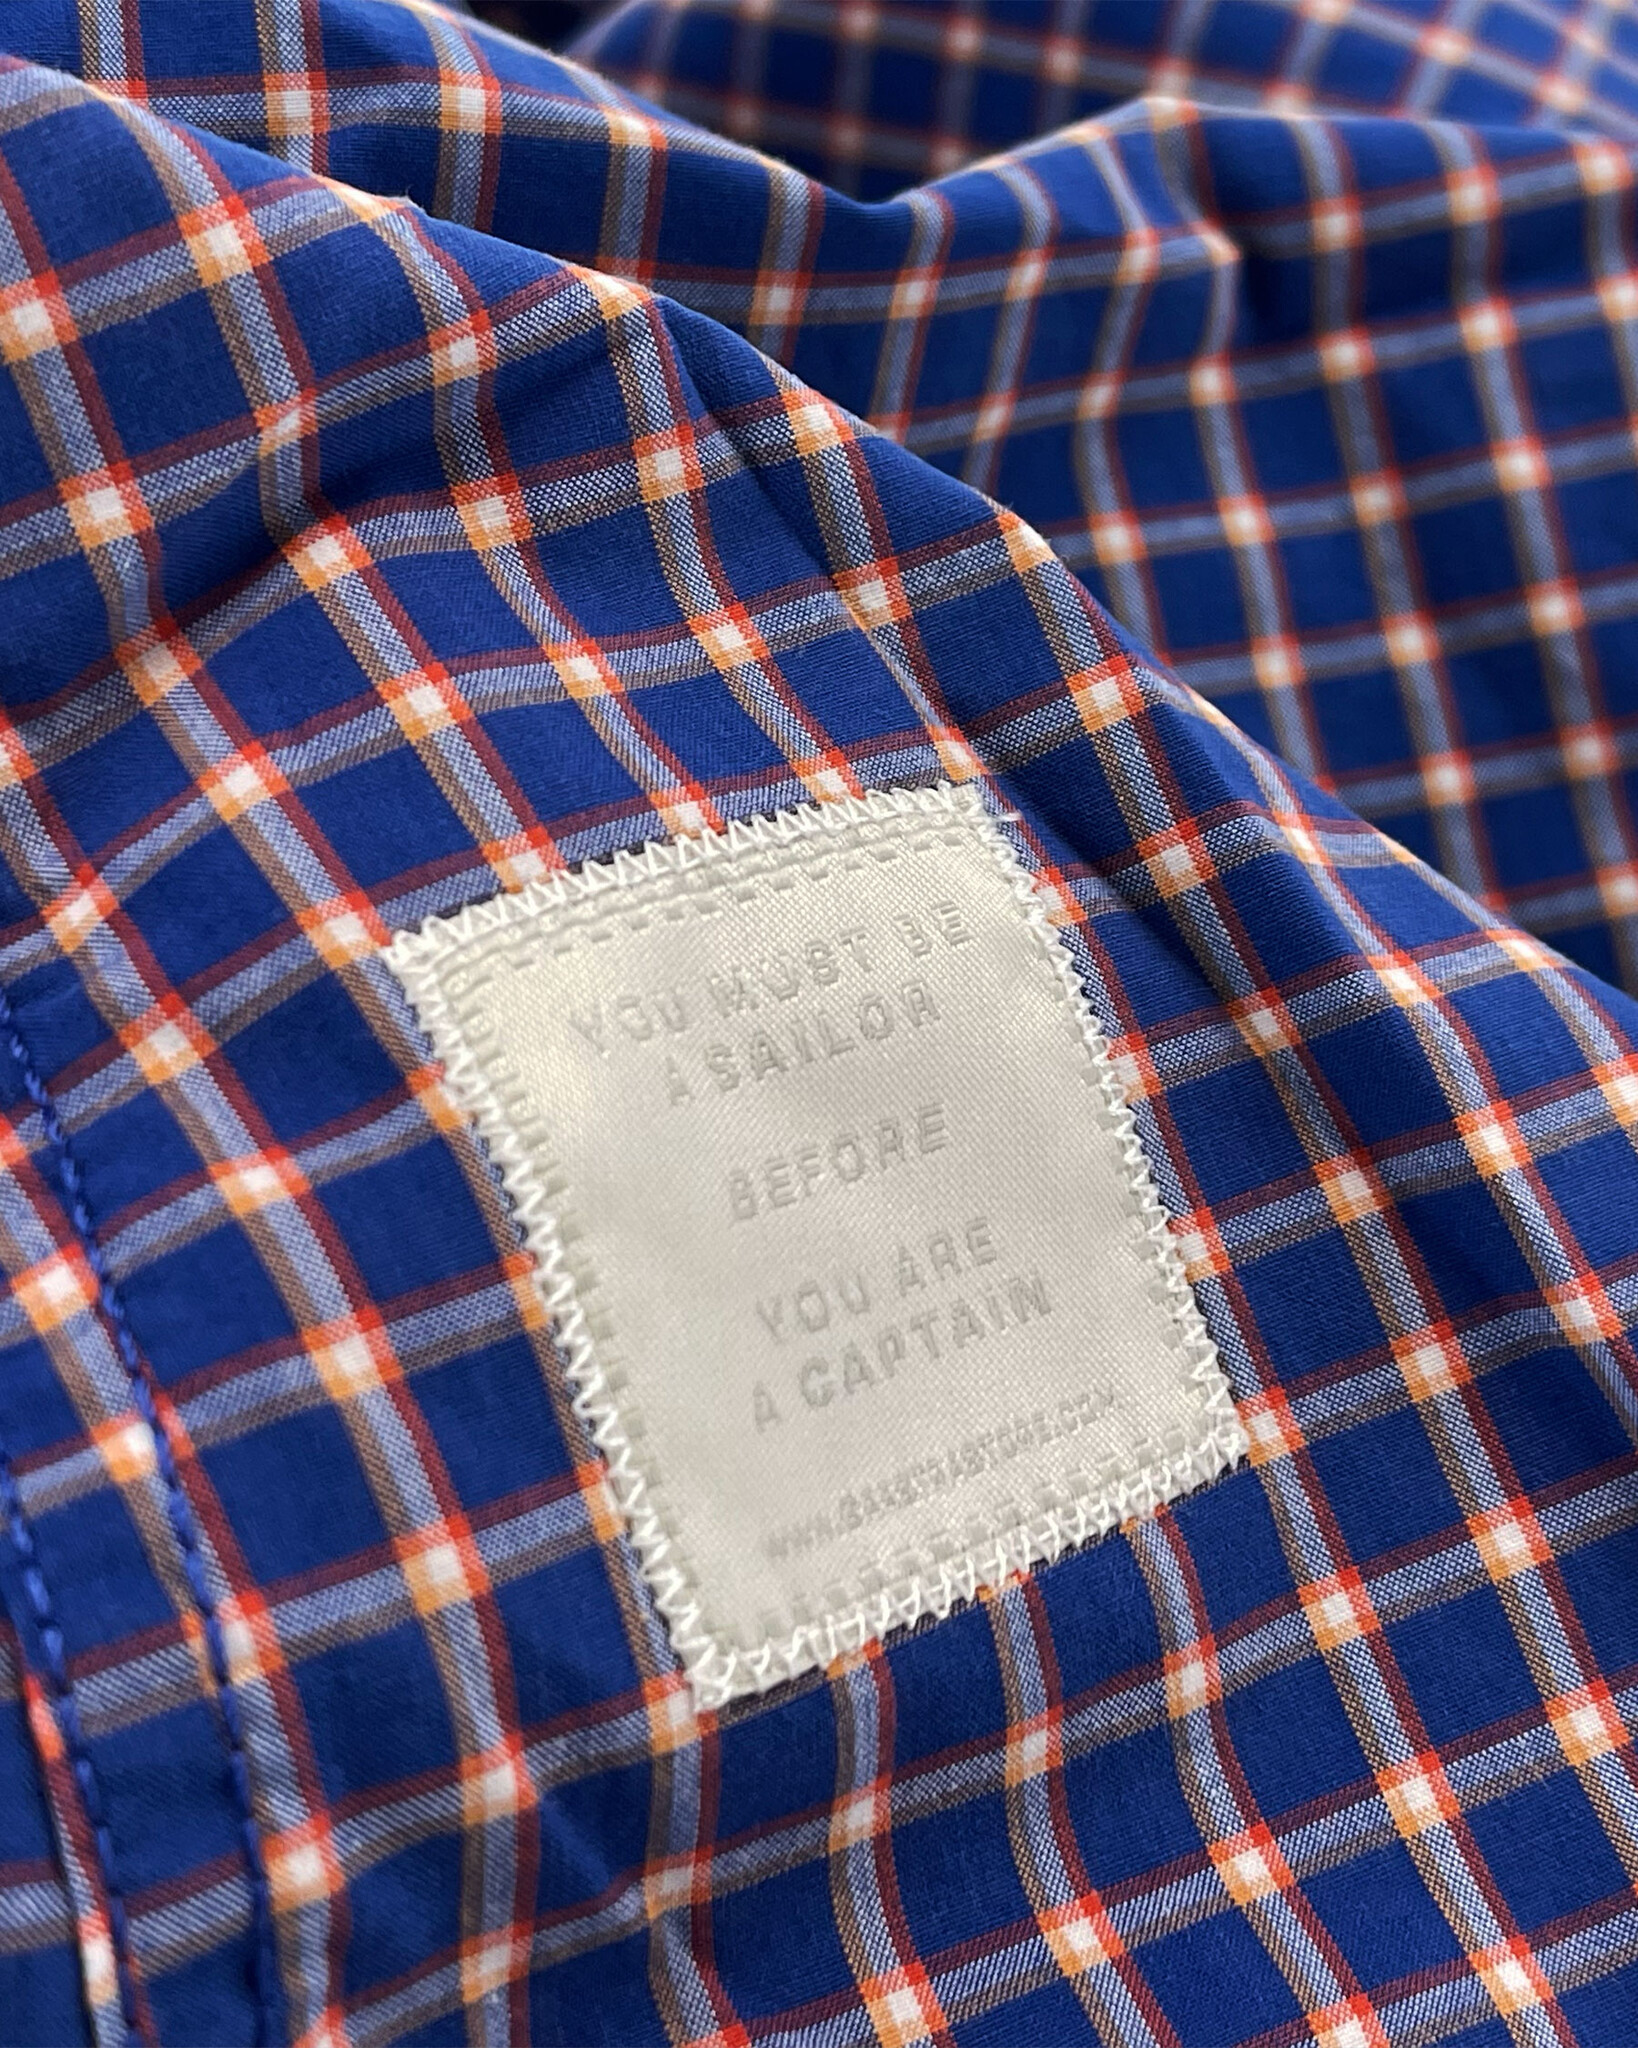 Regular fit 100% cotton yarn dyed check shirt with button-down collar